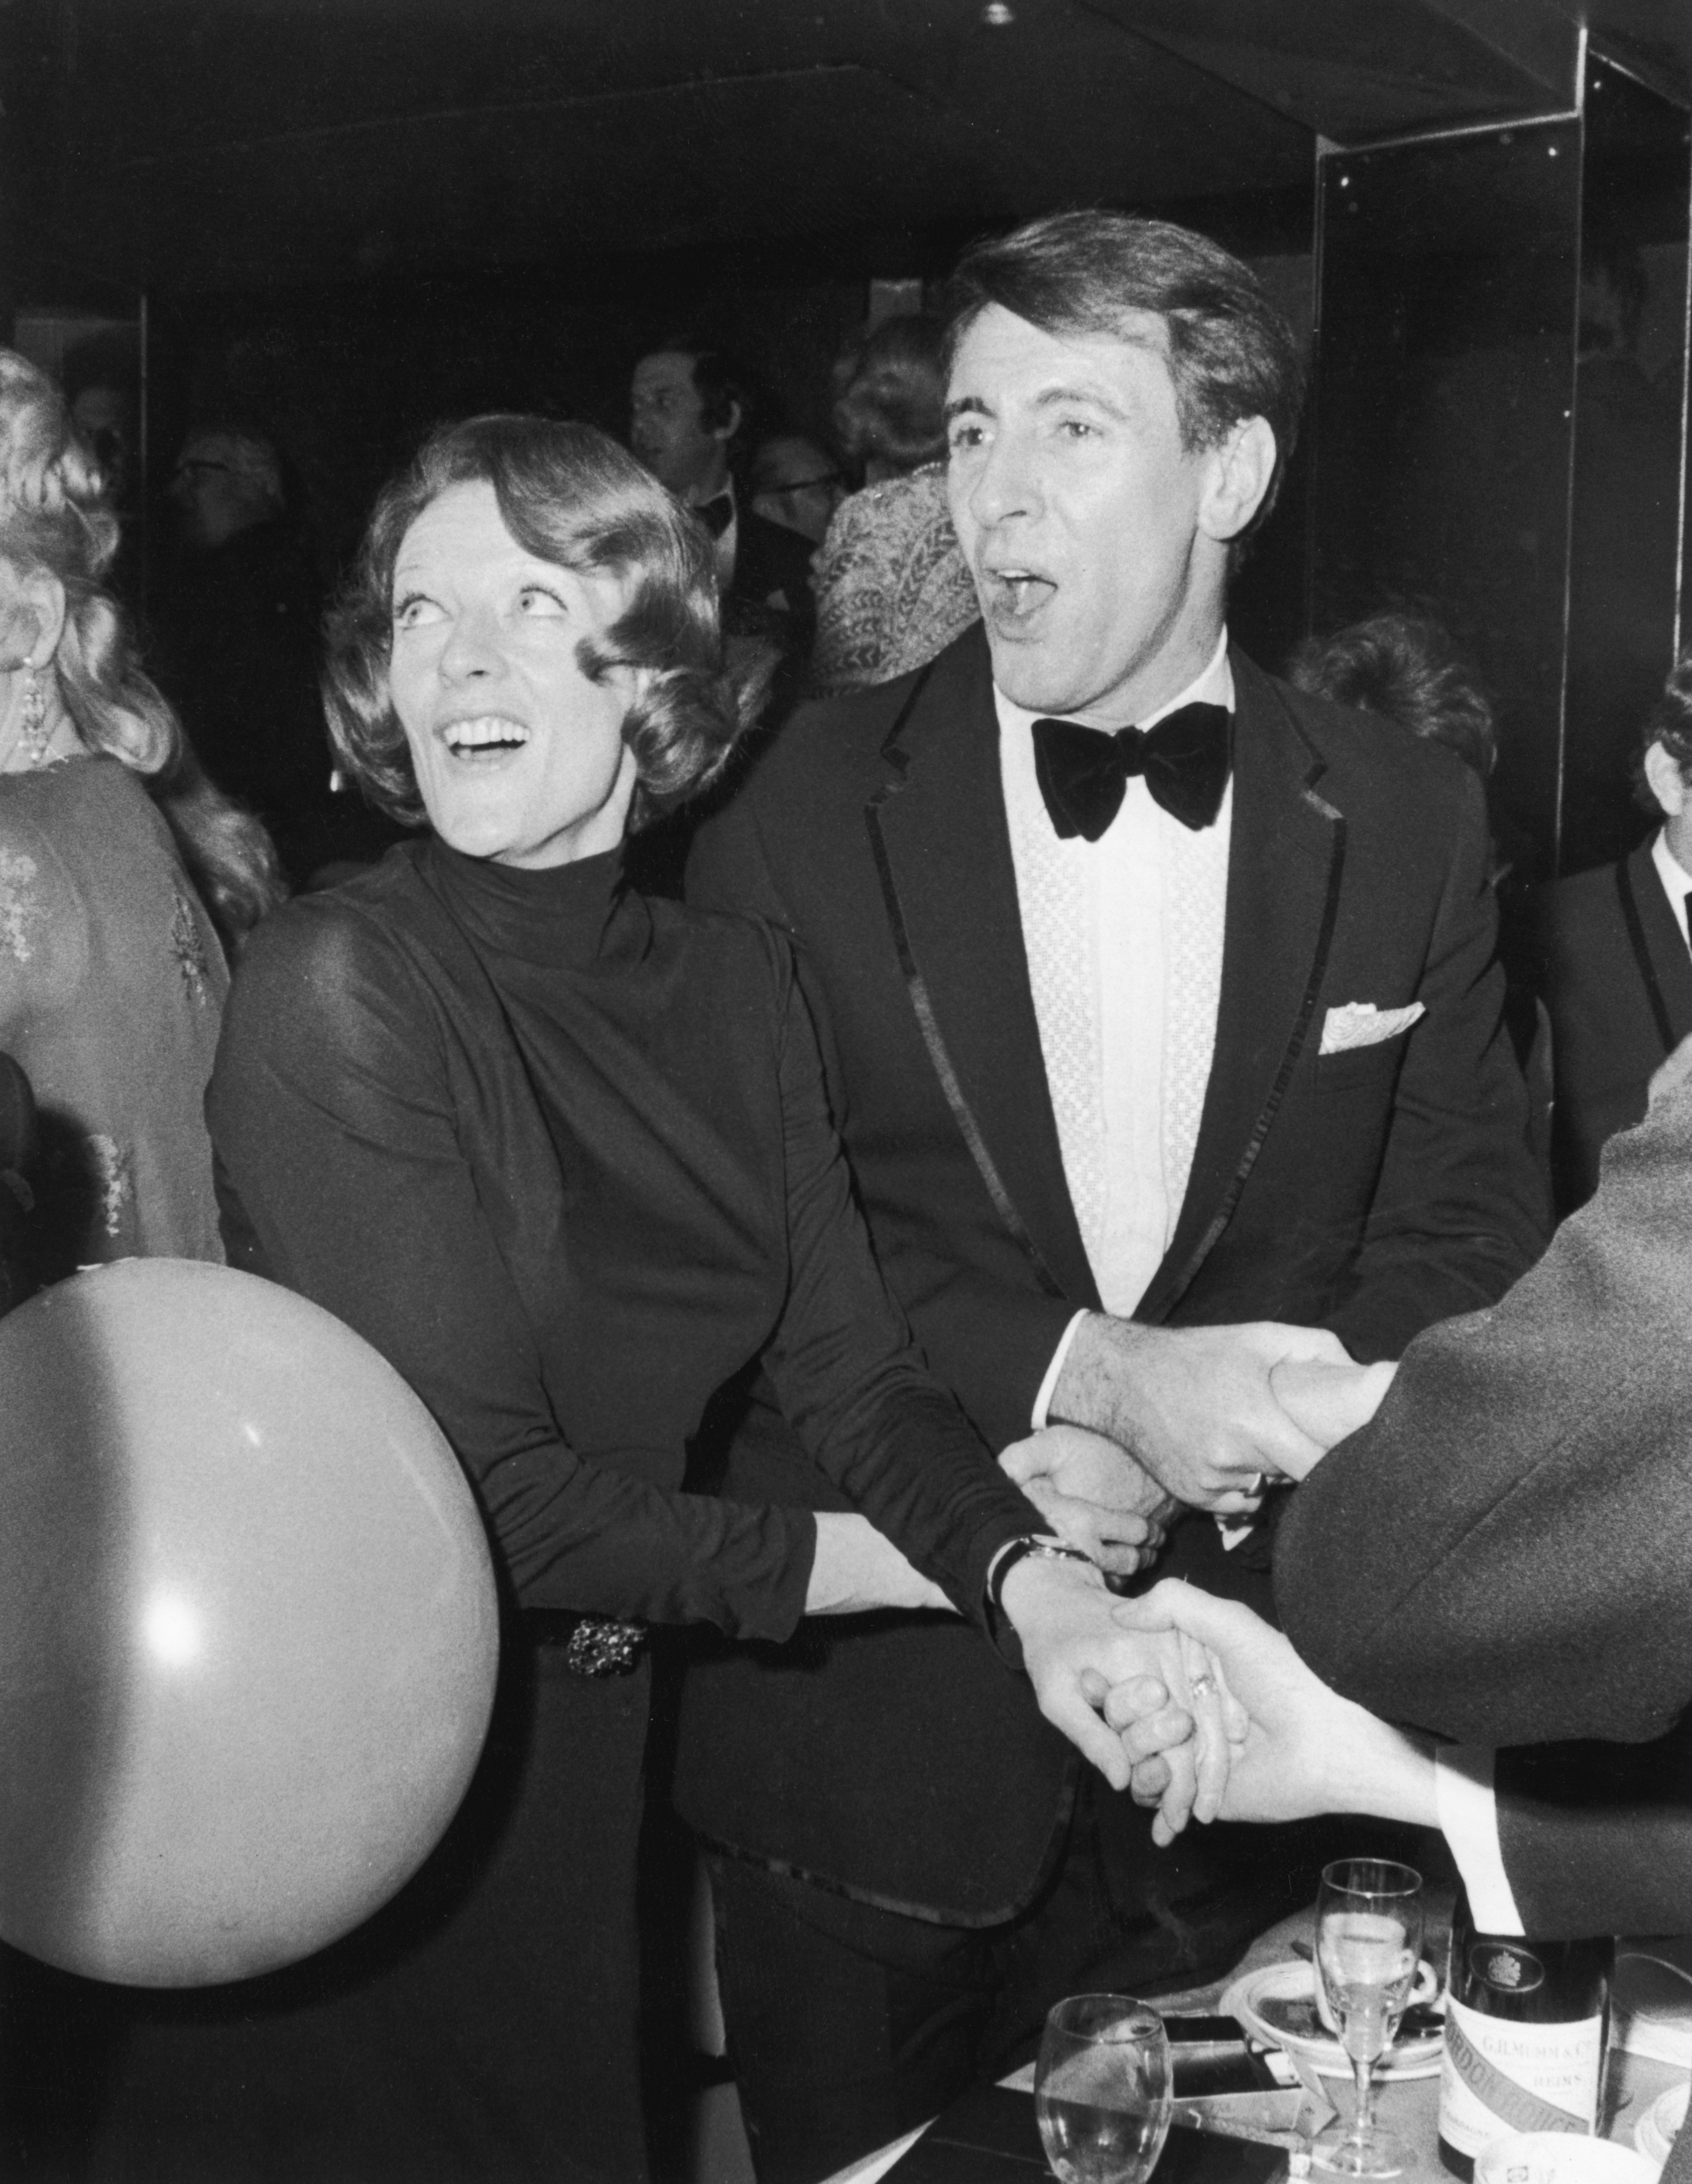 Maggie Smith and her first husband Robert Stephens lead the singing of 'Auld Lang Syne' at a New Year's Eve party on January 1, 1973. | Source: Getty Images